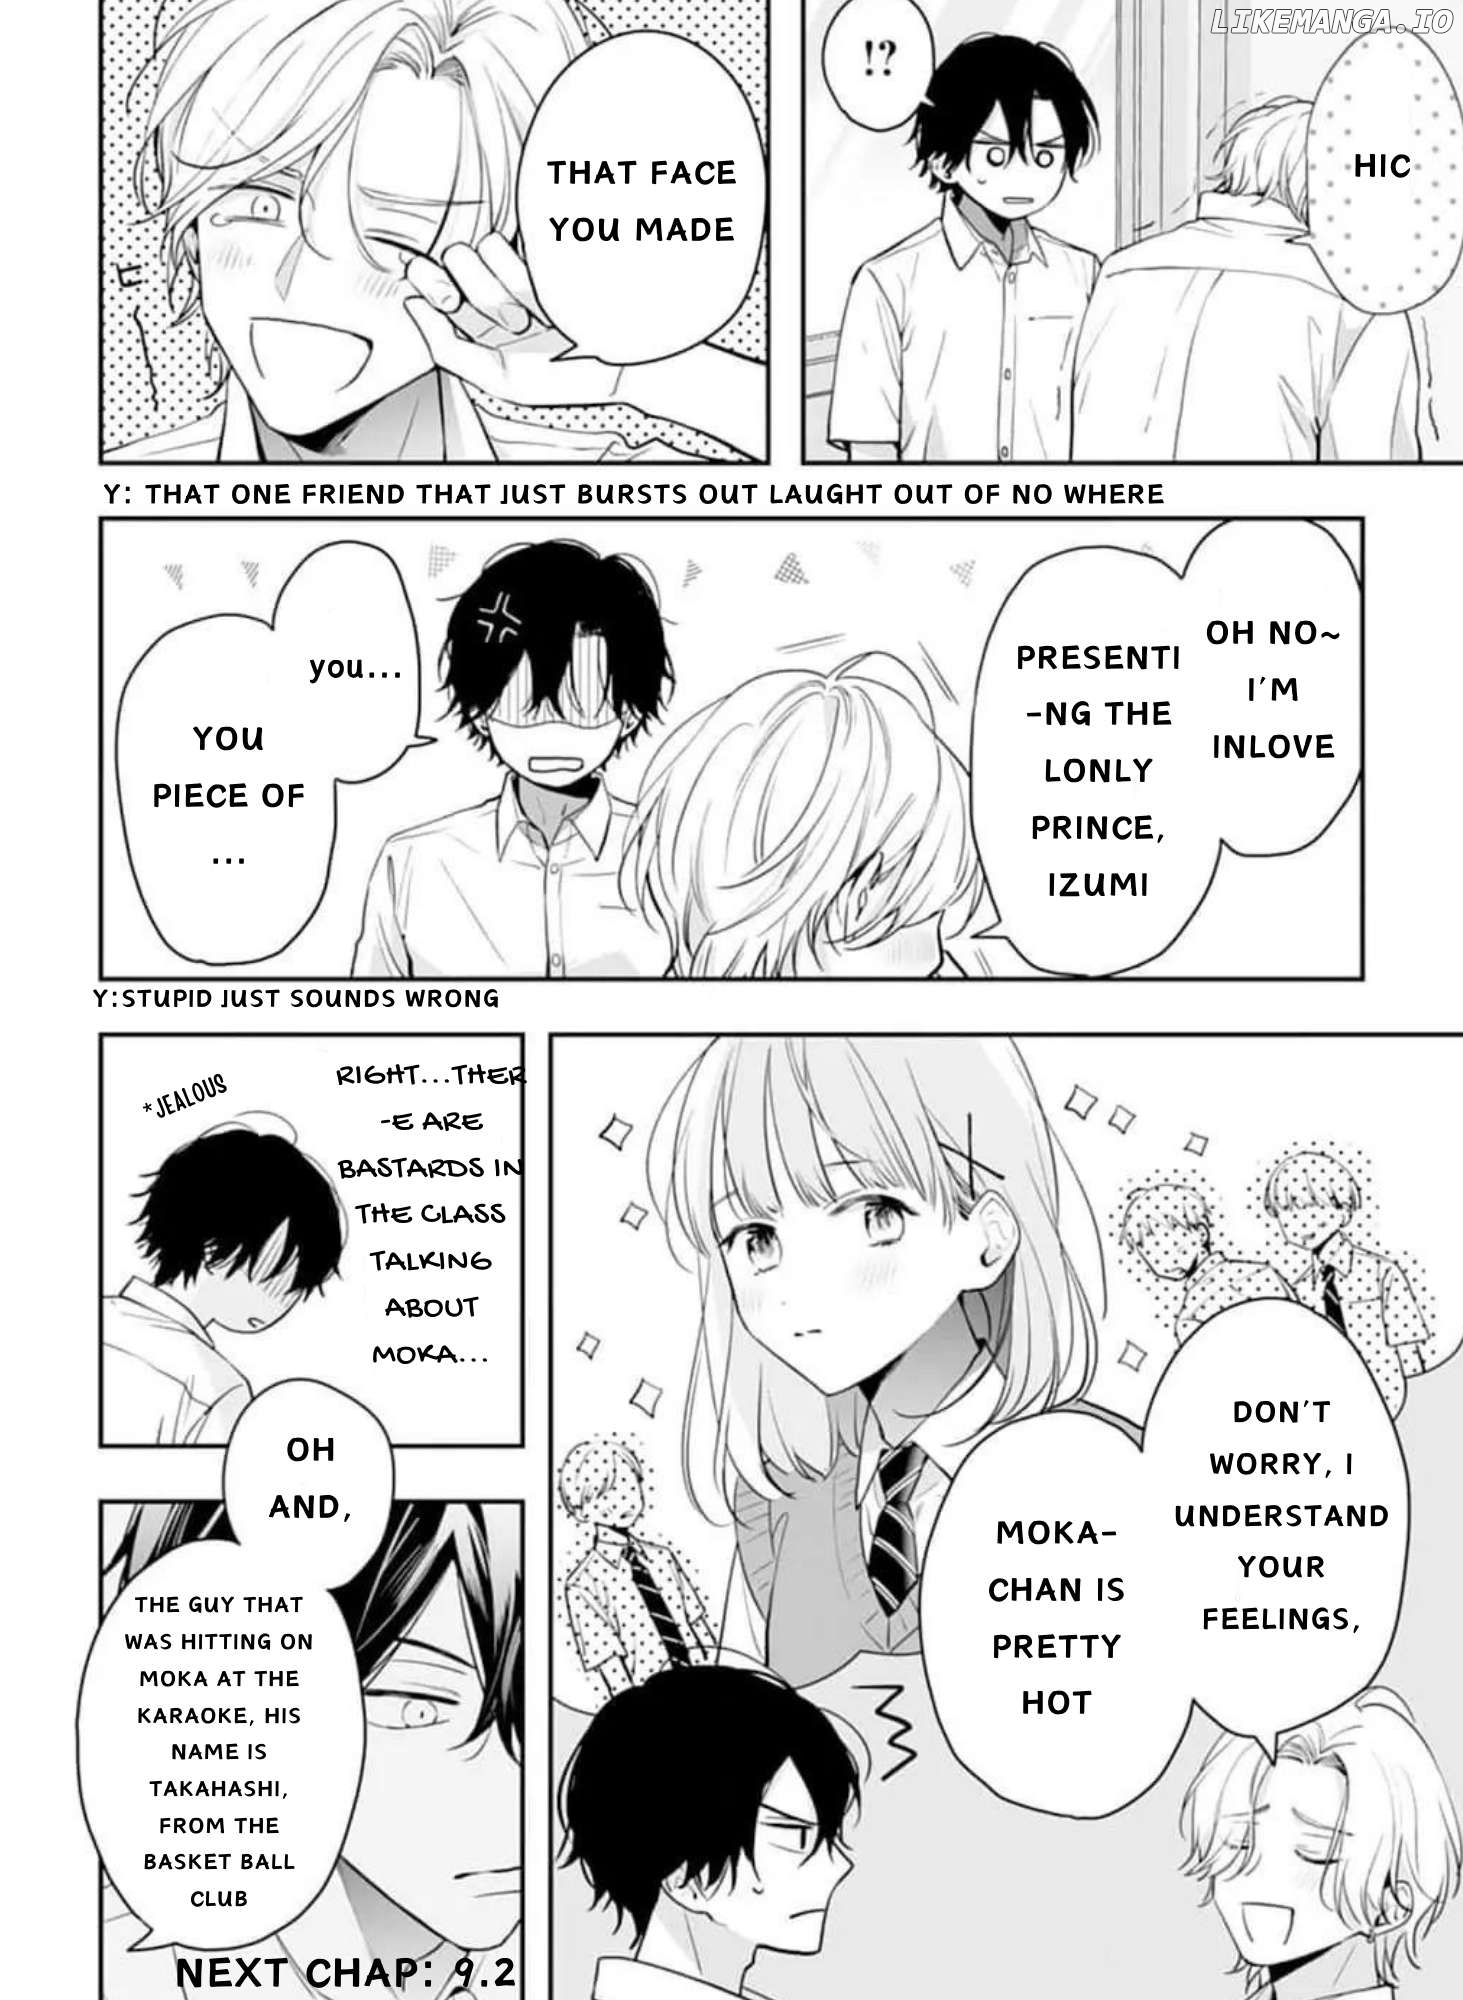 Kurosaki Wants Me All to Himself ~The Intense Sweetness of First Love~ Chapter 9.1 - page 10